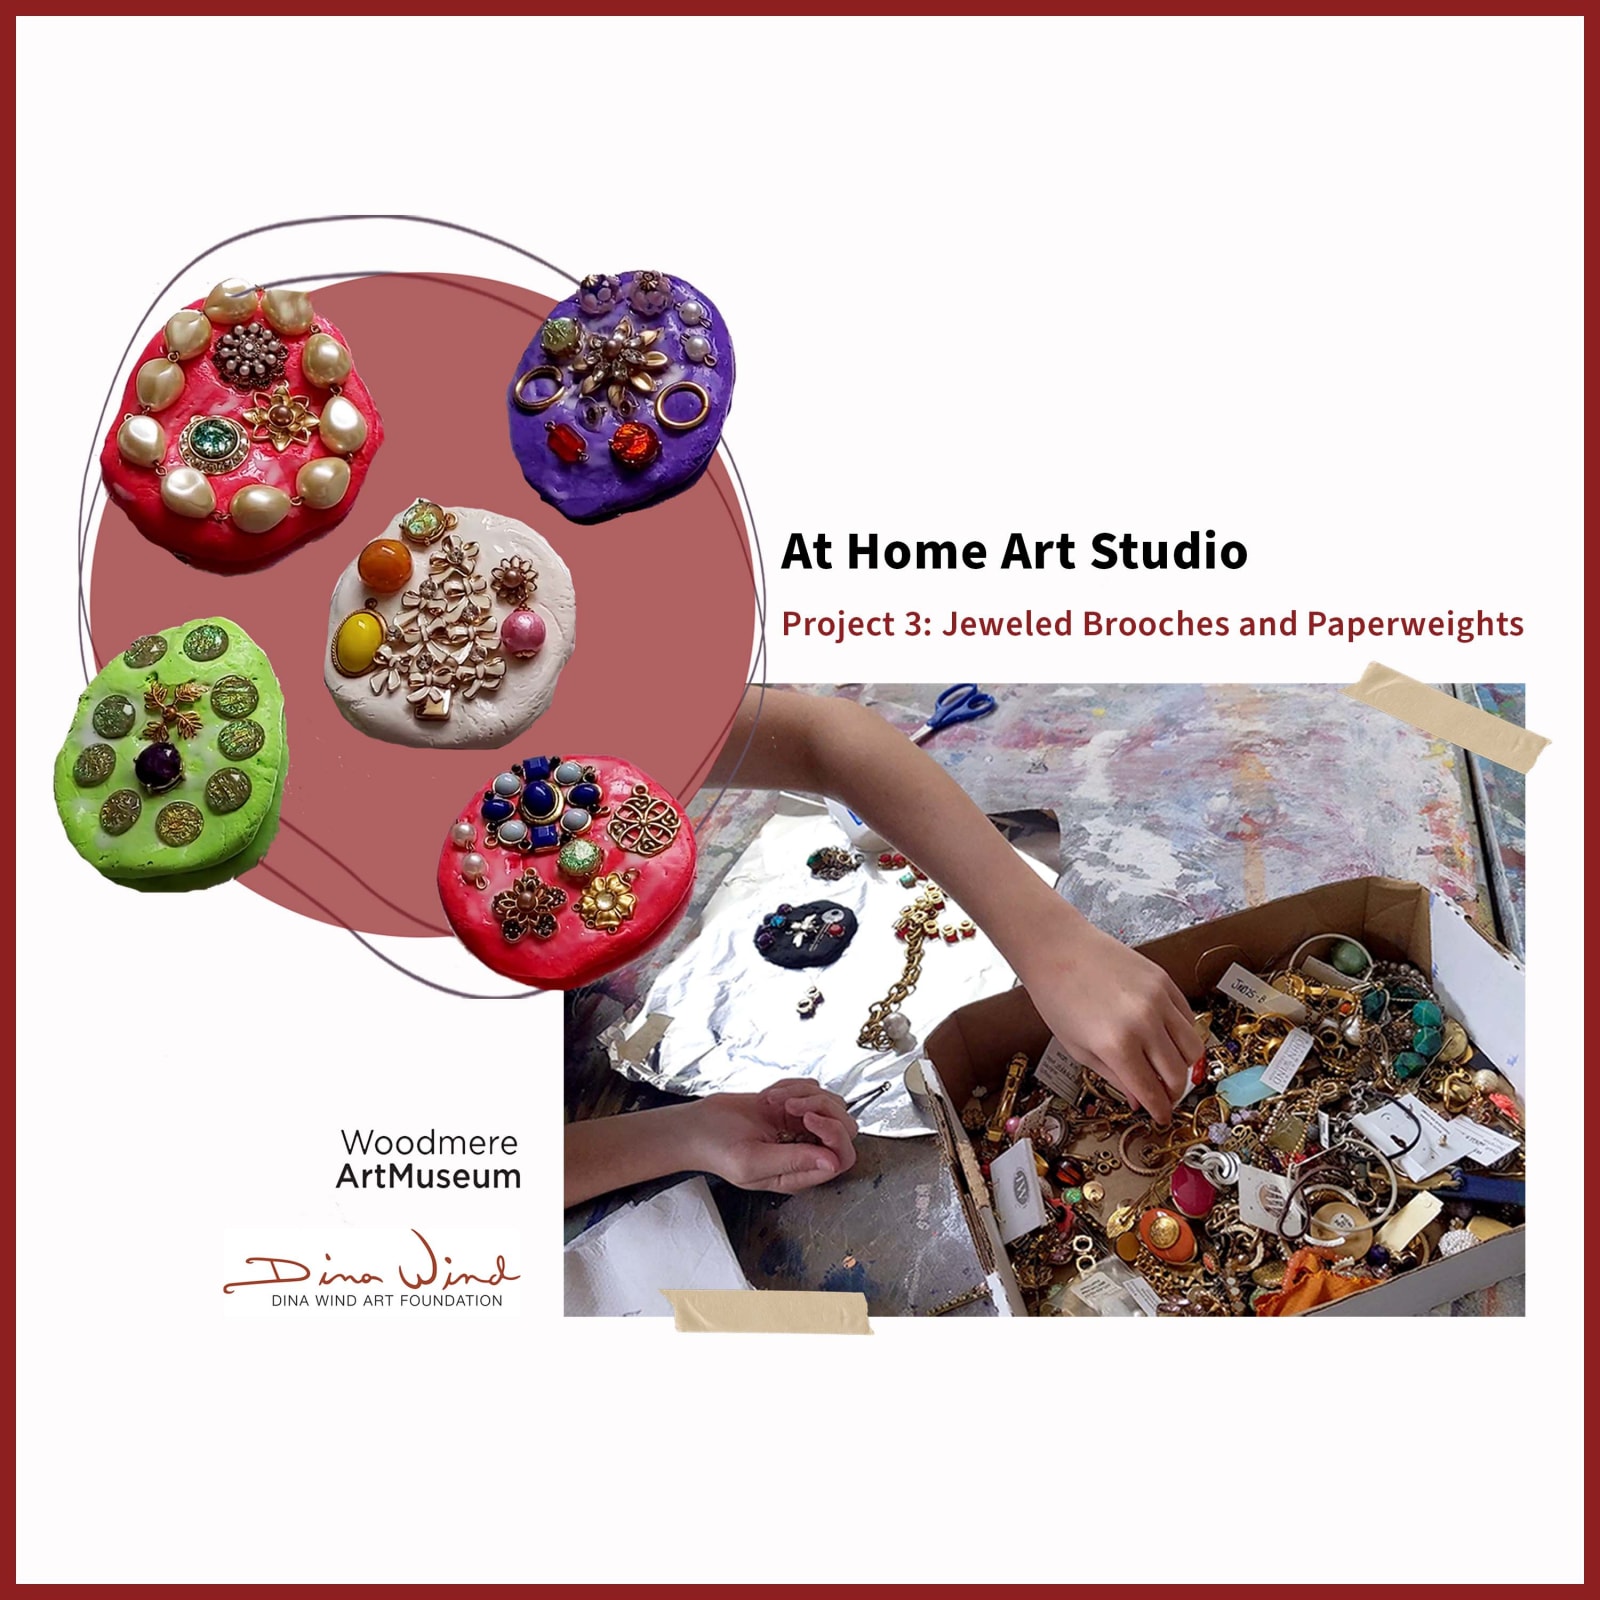 At Home Art Studio Project 3: Jeweled Brooches and Paperweights